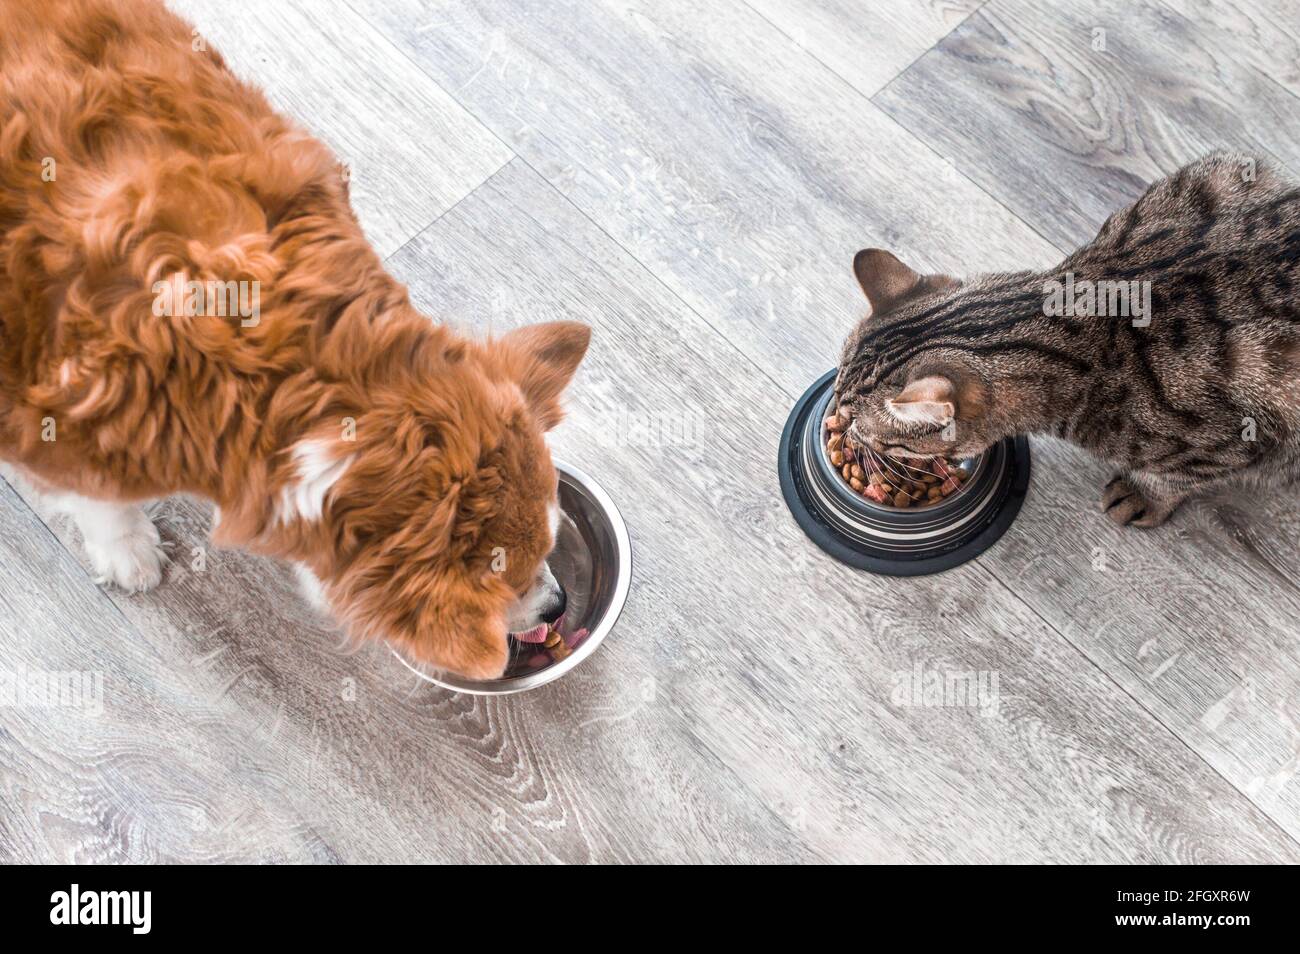 dog and a cat are eating together from a bowl of food. Animal feeding concept Stock Photo